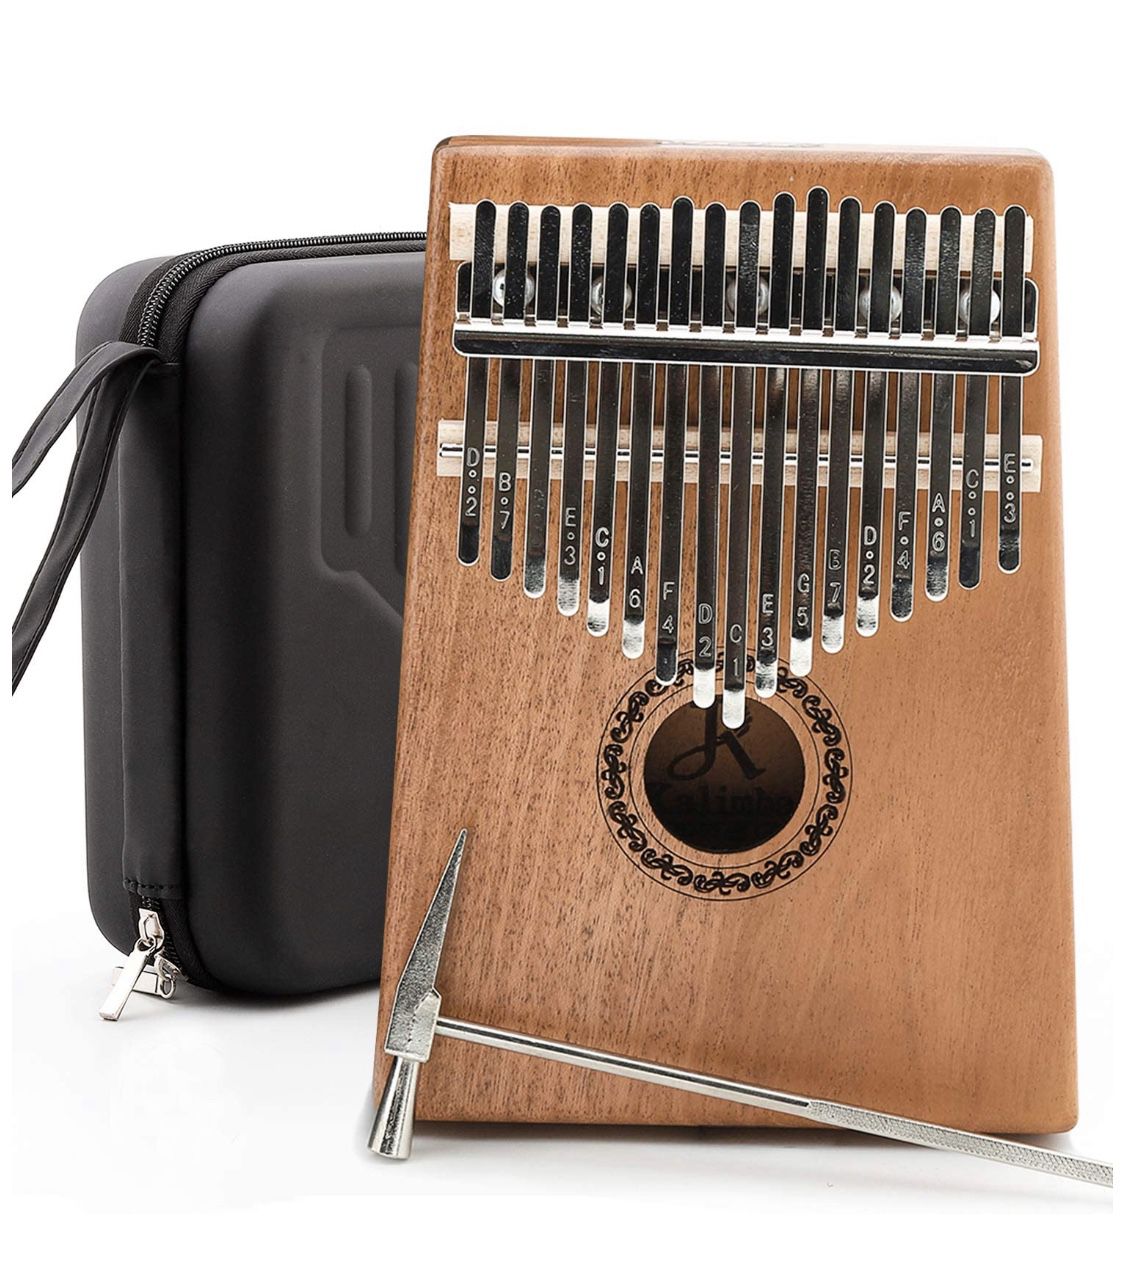 Kalimba with carrying case